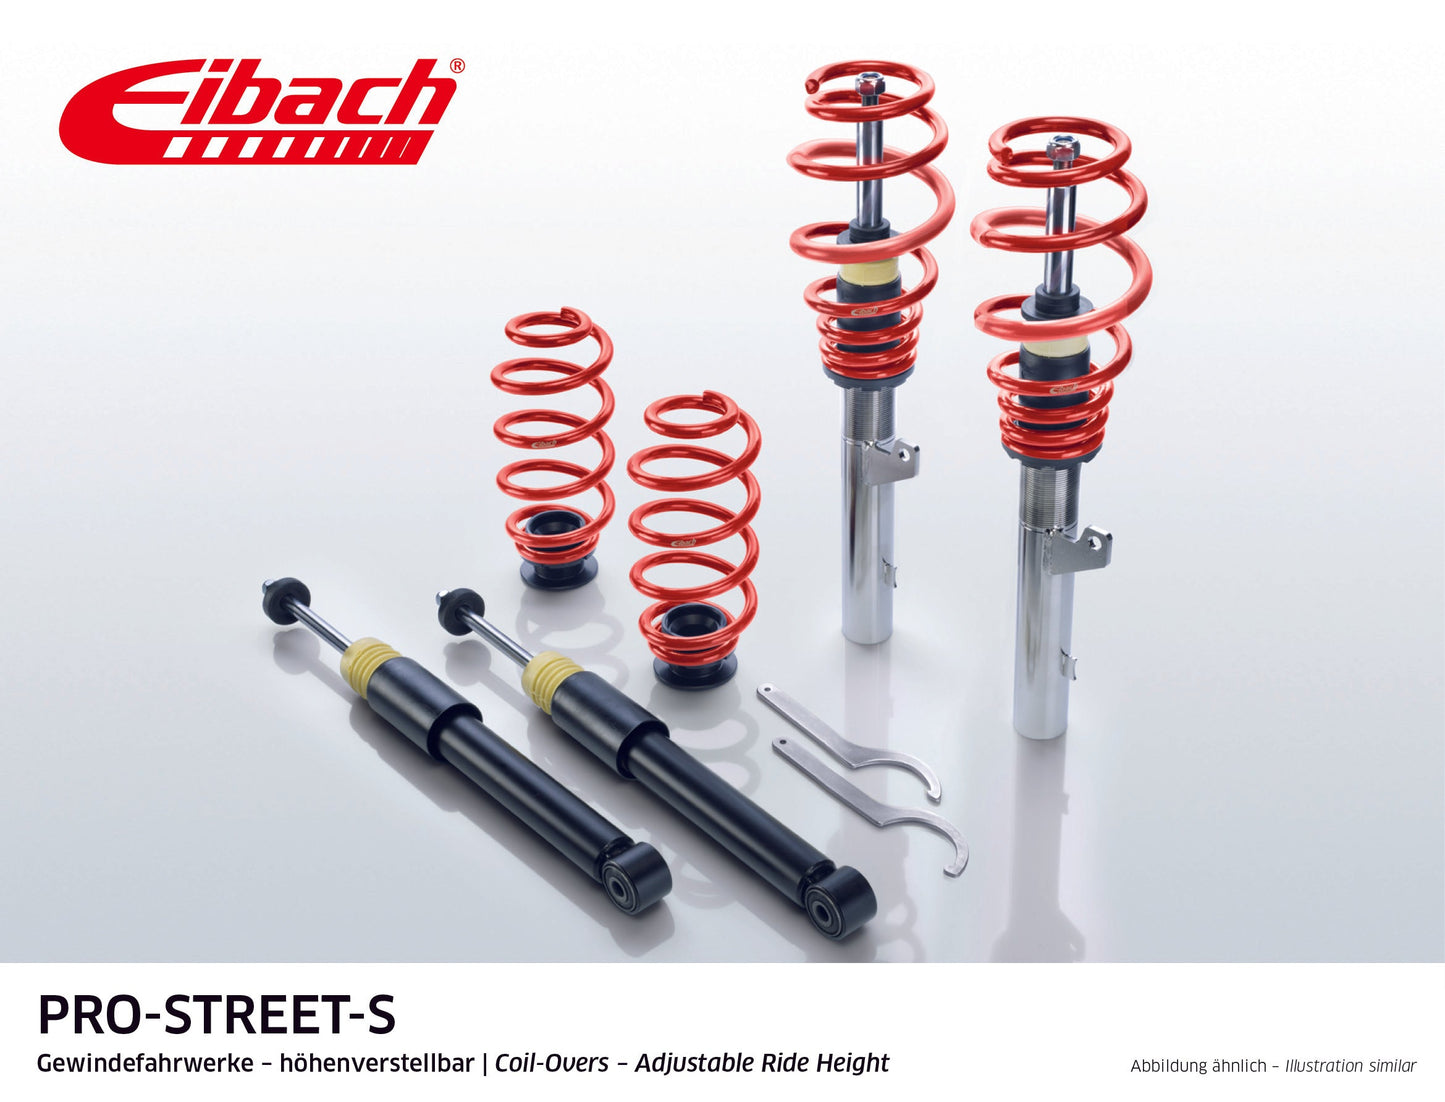 Eibach Pro-Street Coilover (PSS65-35-020-01-22) at £1024.34